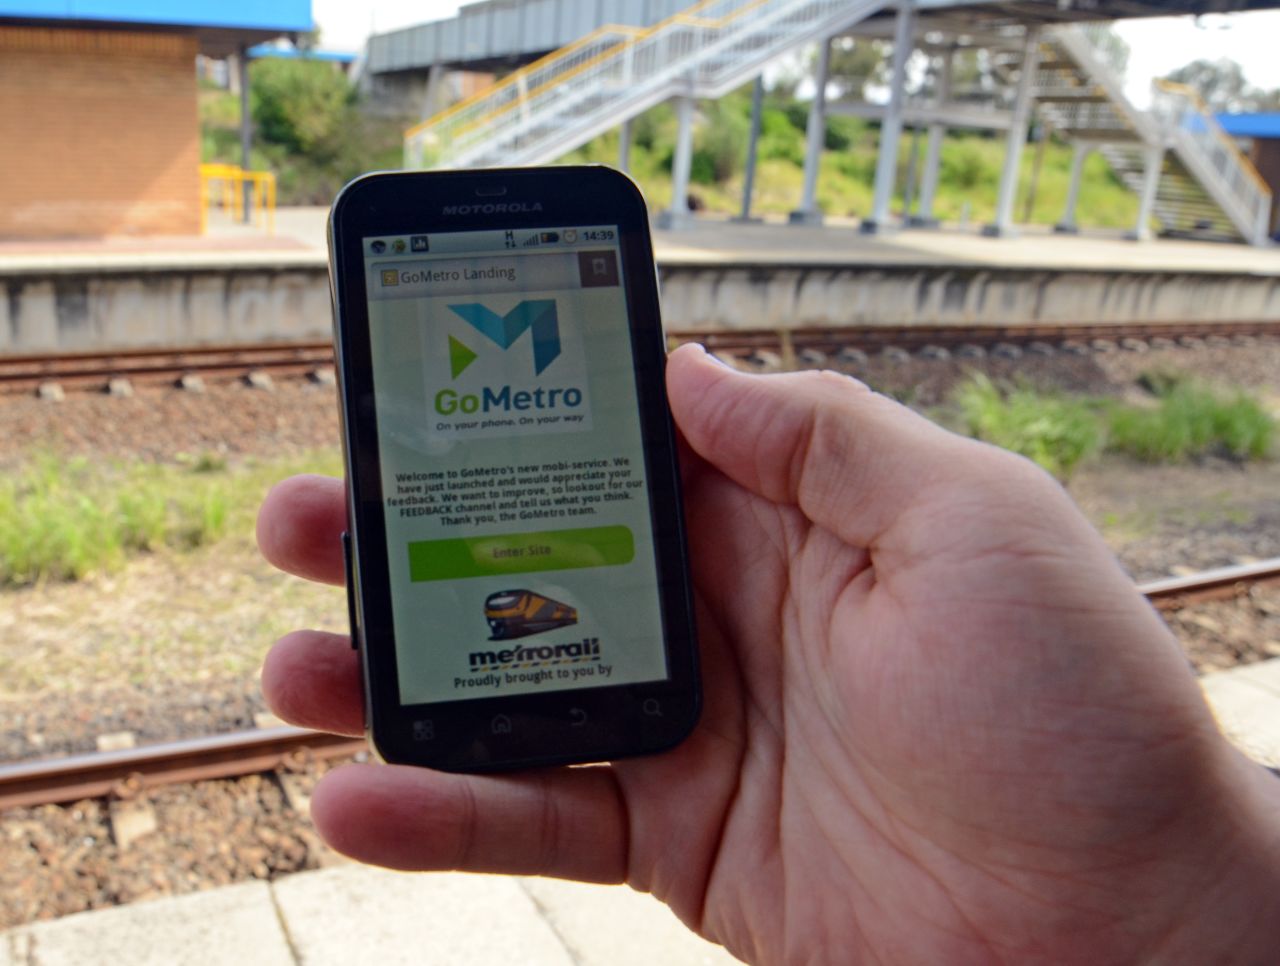 More smartphones could improve public services. Startup GoMetro aims to improve commuting in South Africa by providing real-time train schedules, associated platform changes, a trip planner, fare calculator and route maps.